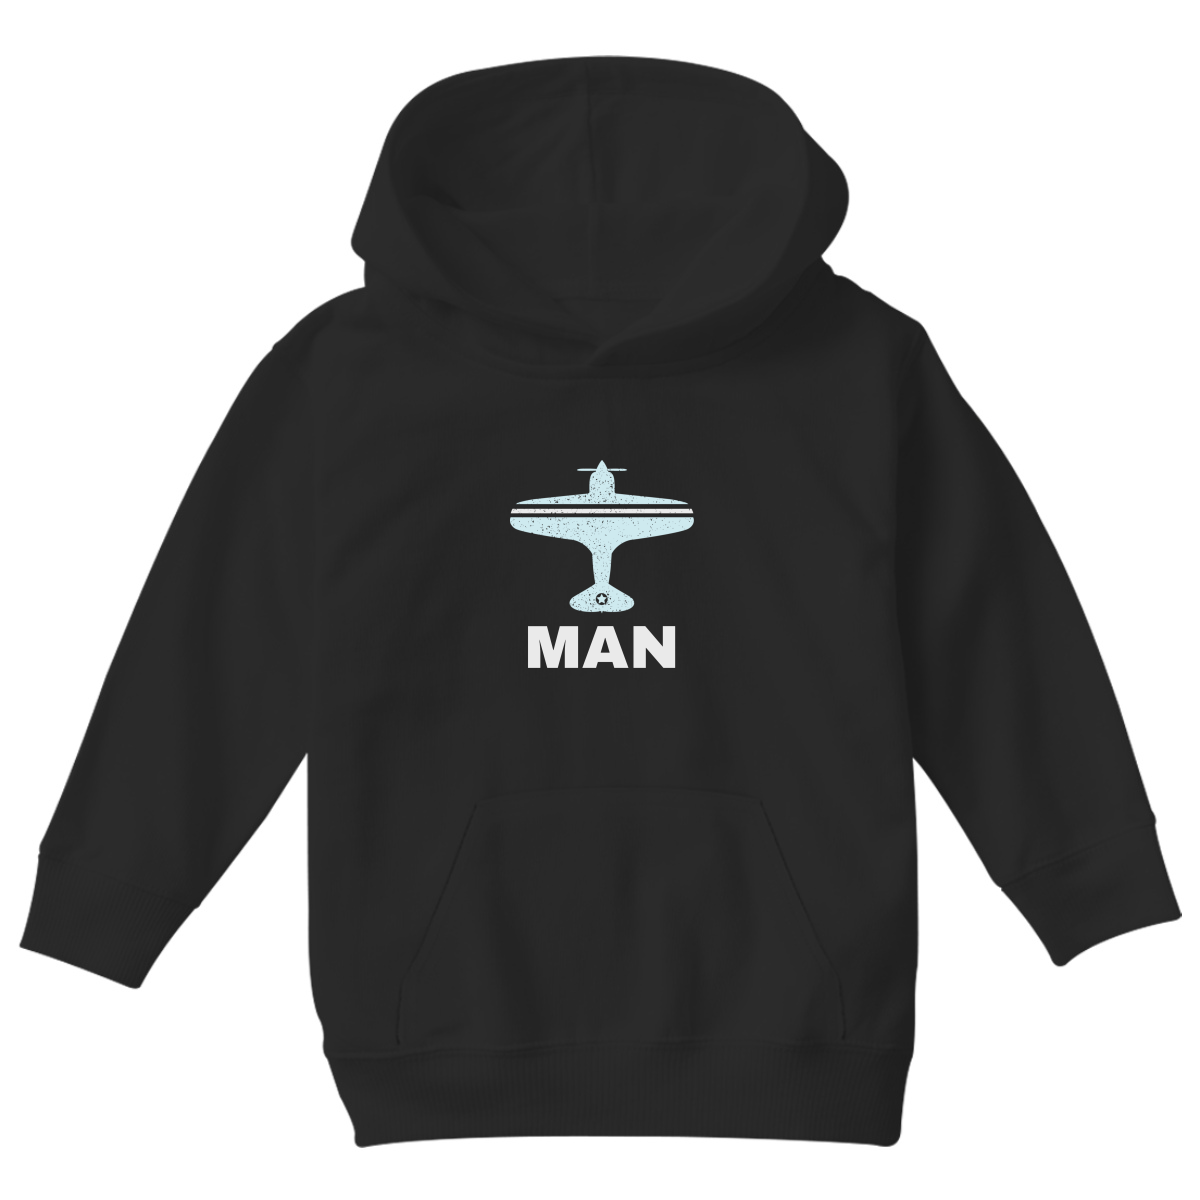 Fly Manchester MAN Airport Kids Hoodie | Black